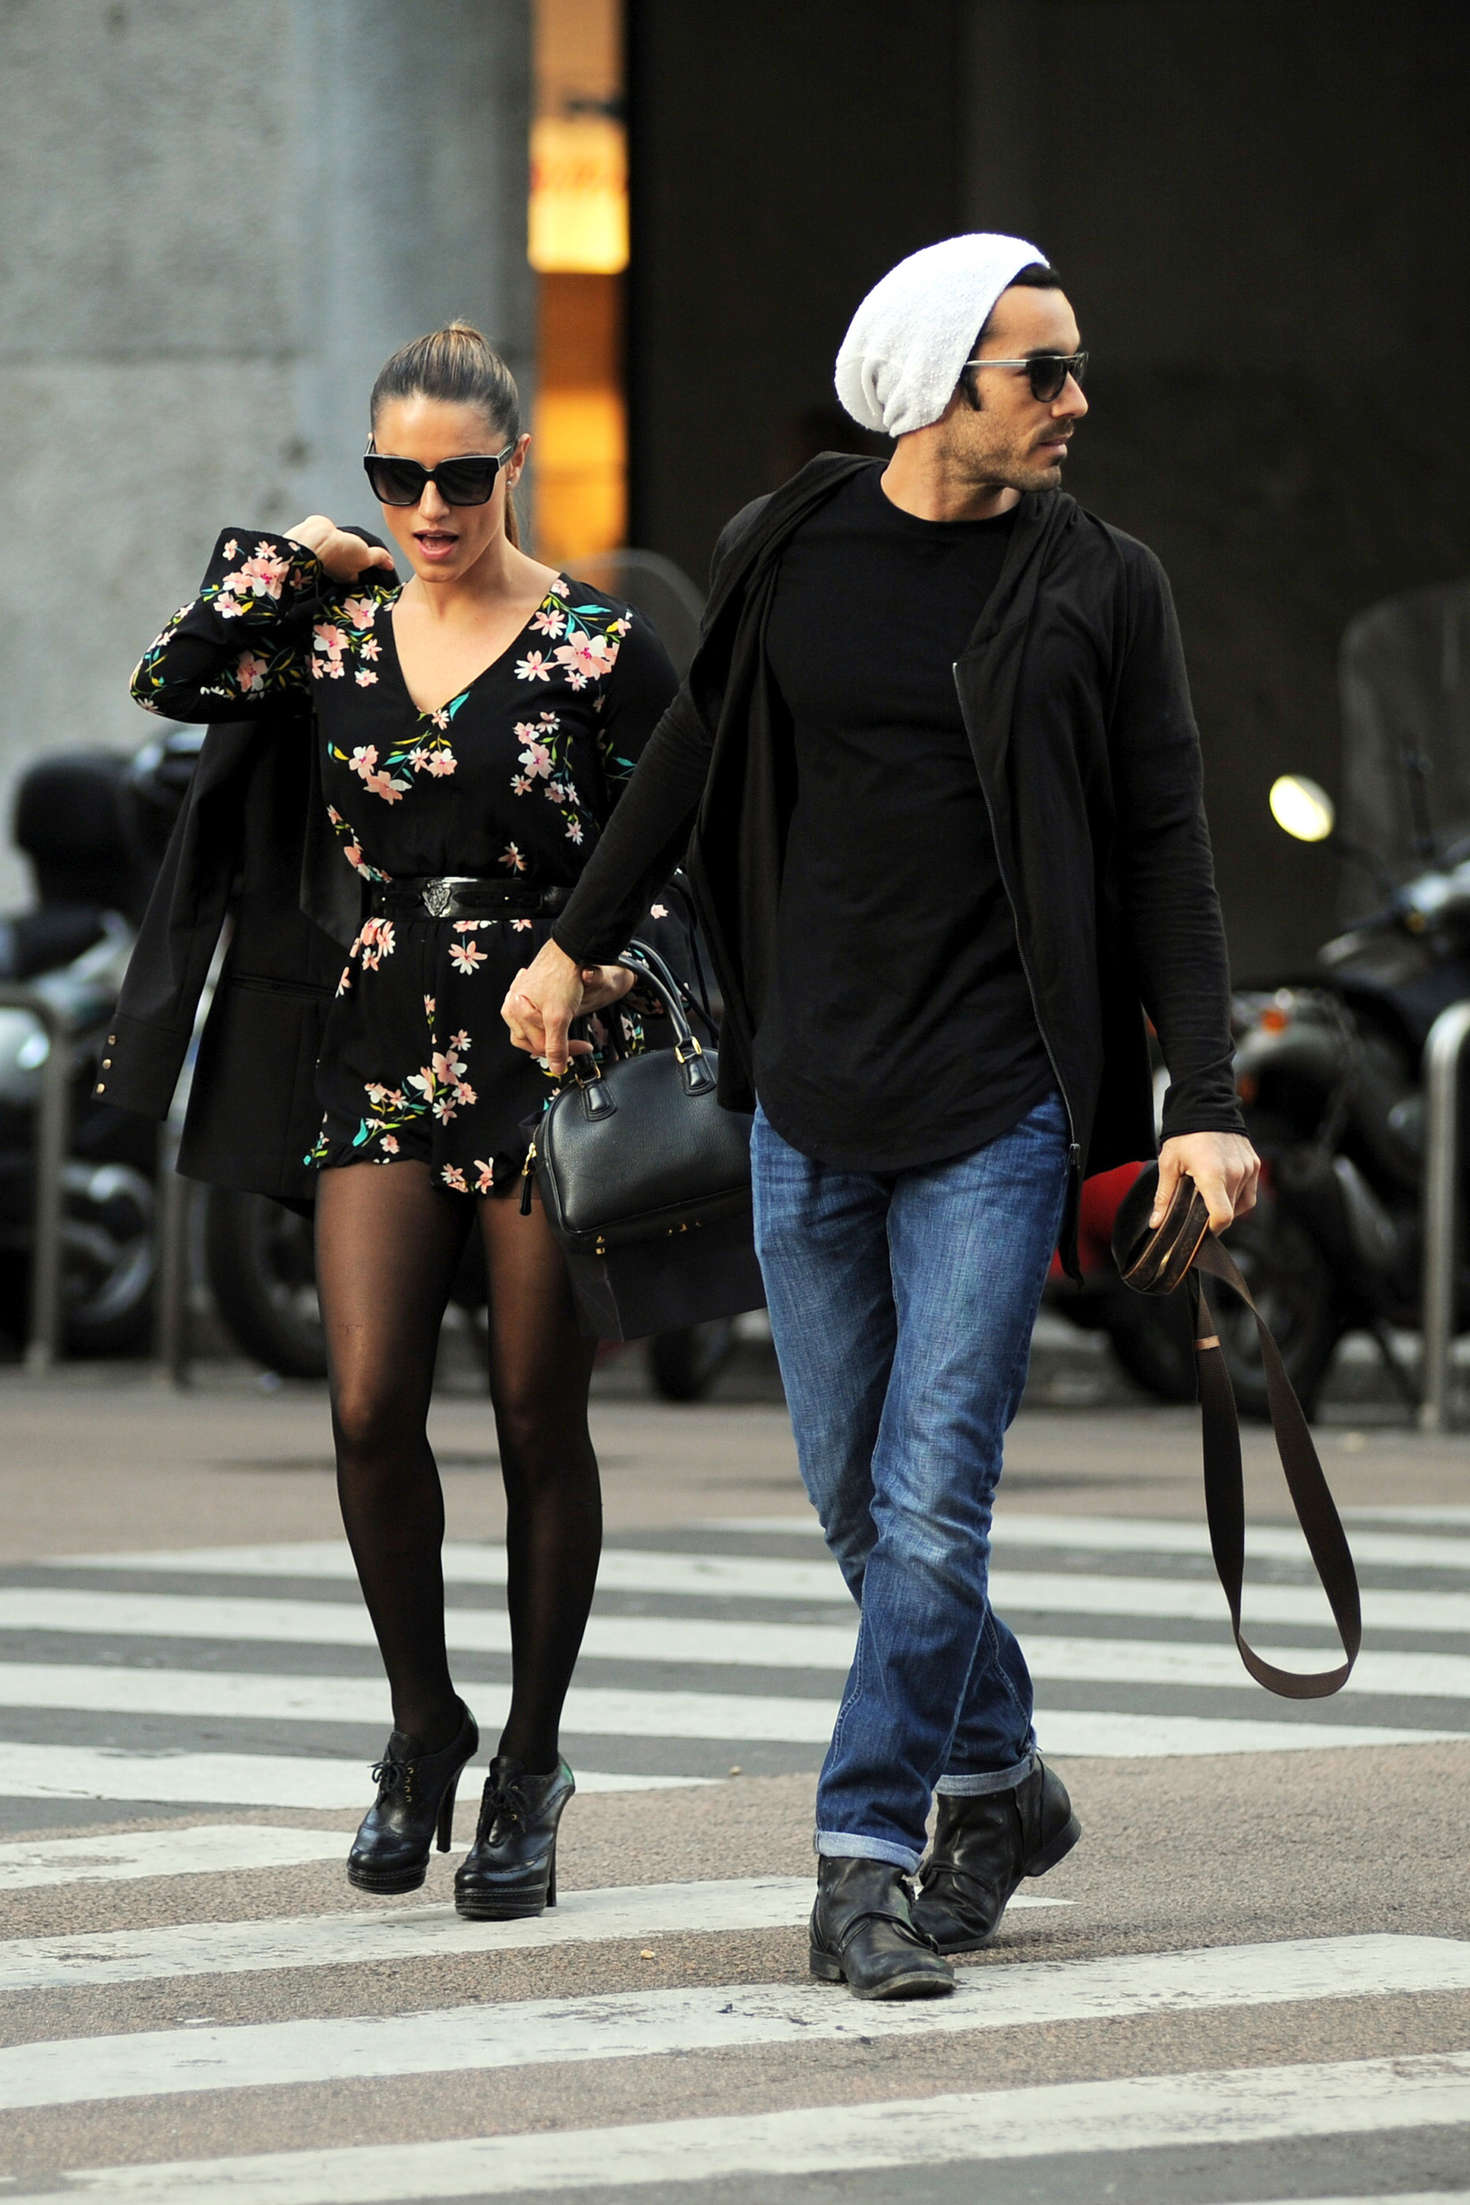 Lola Ponce with her boyfriend Aaron Diaz in Milan